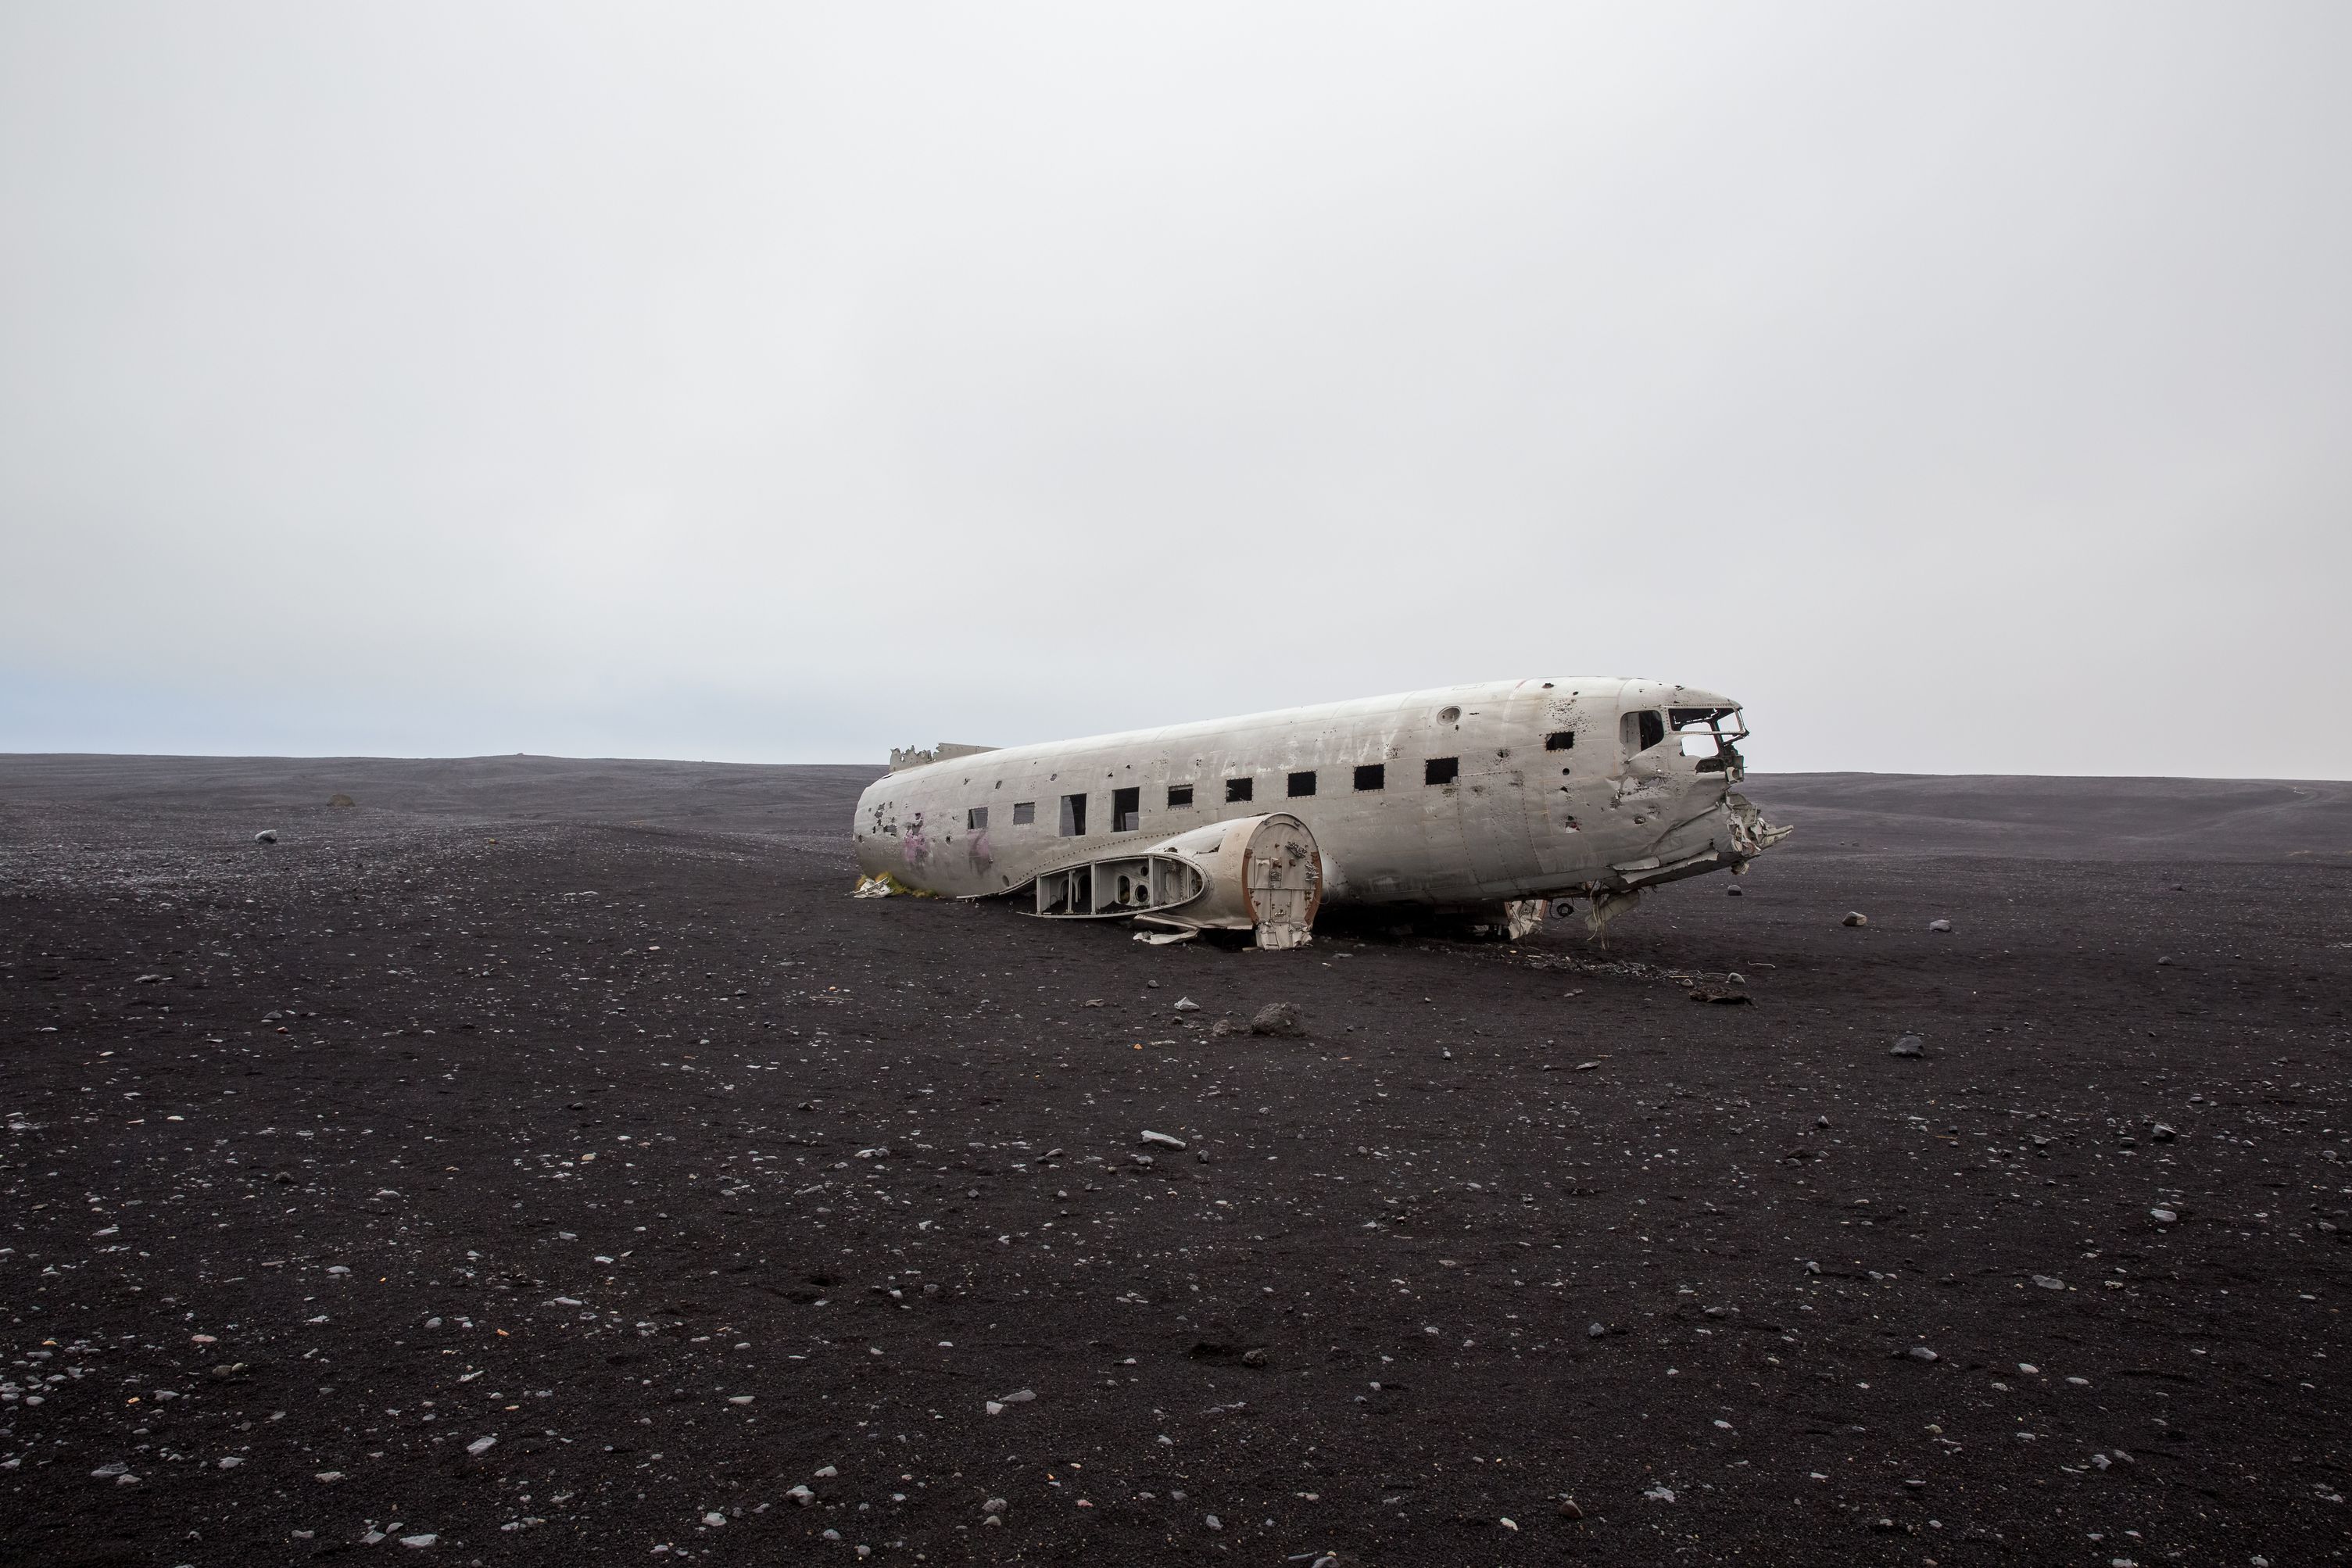 An aerial view of the abandoned DC plane on Solheimasandur beach in Iceland. The plane rests in the middle of a vast black sand beach.